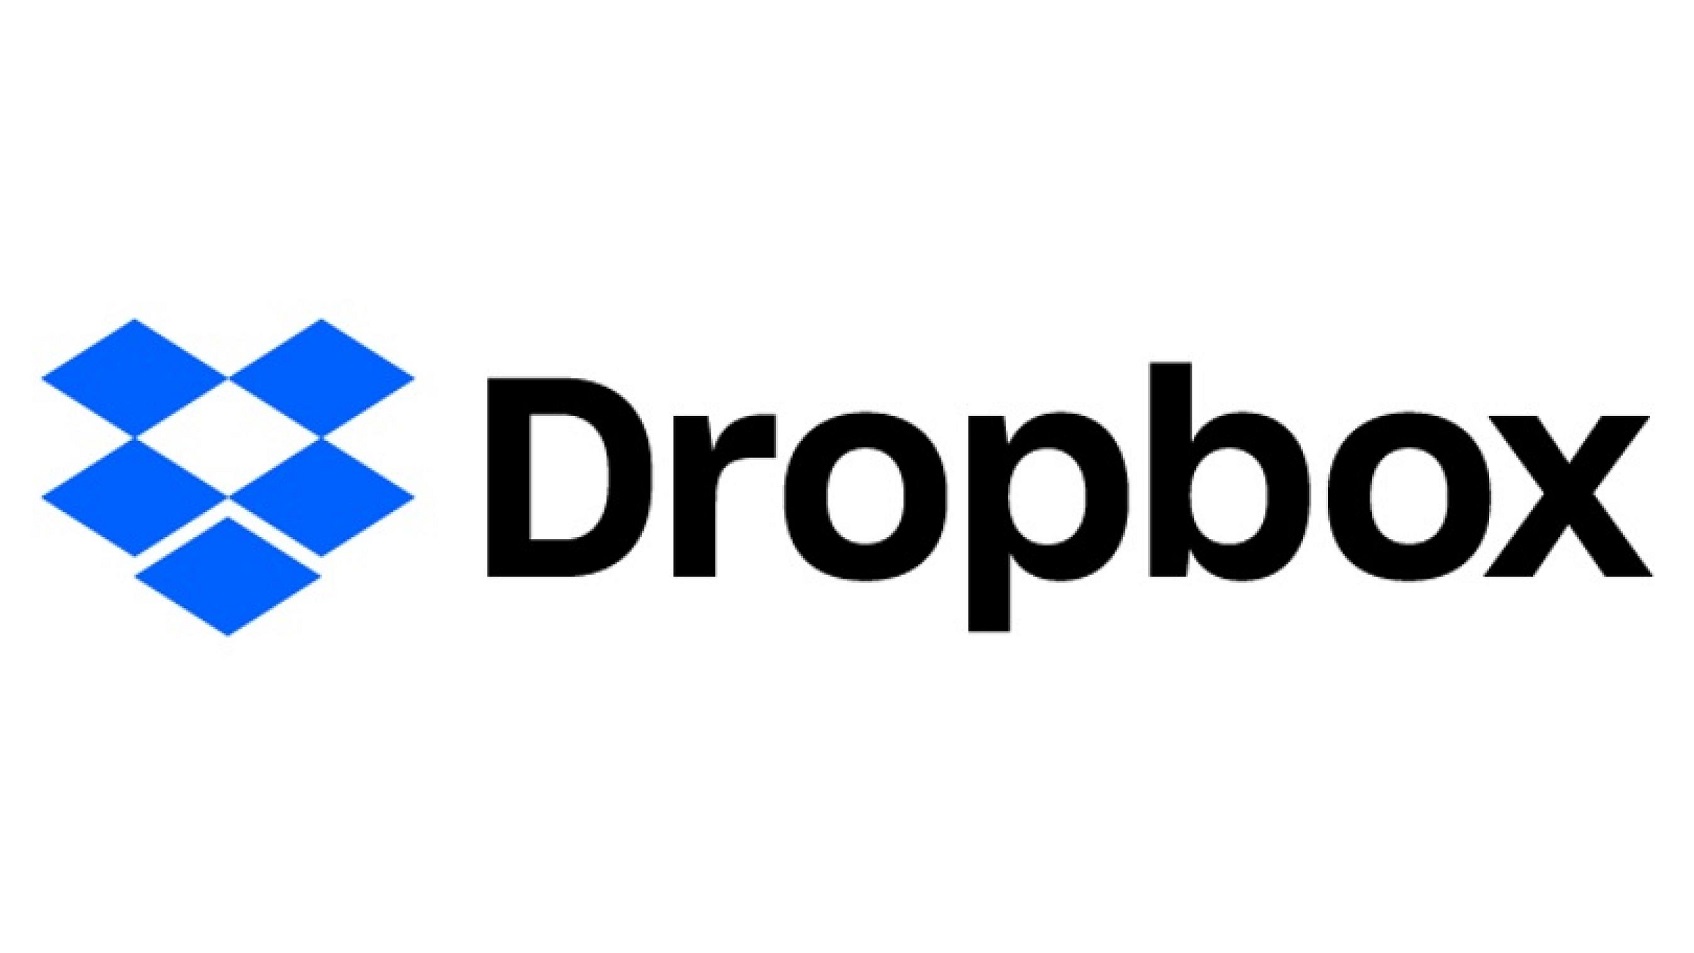 dropbox phone number to have an inapproprioate file deleted